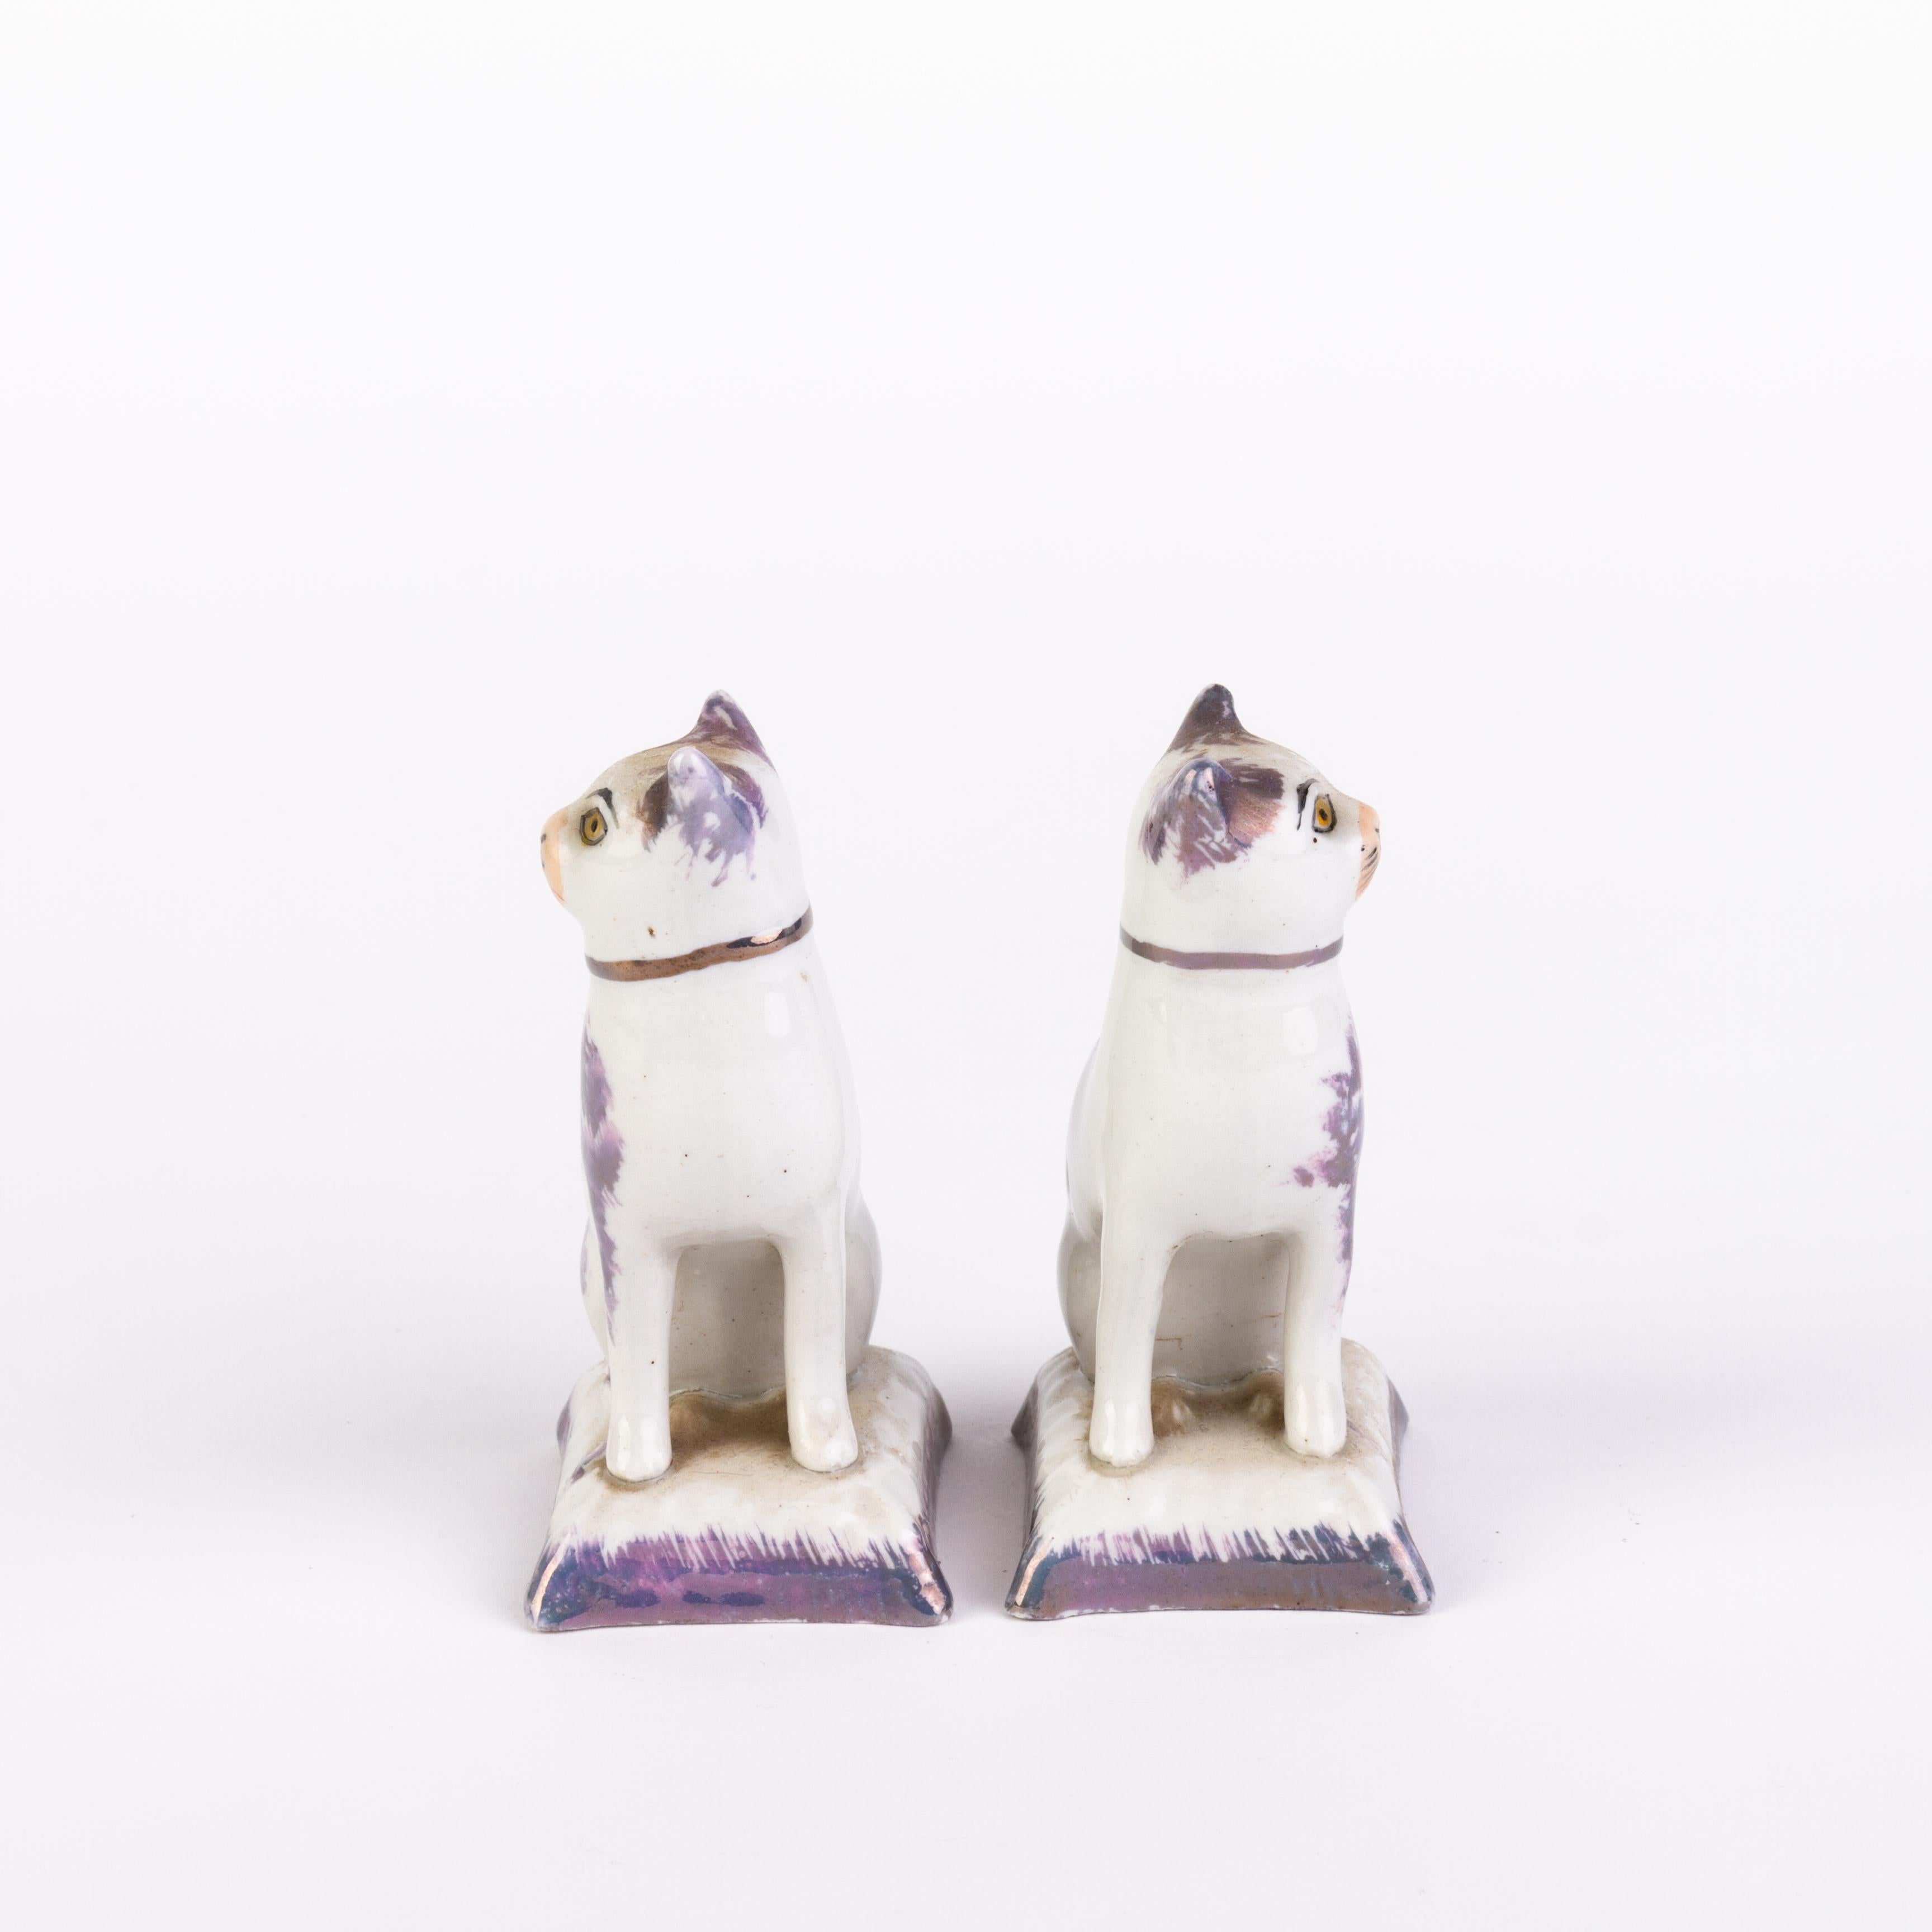 Polychromed Victorian English Pair of Polychrome Staffordshire Pottery Cats 19th Century